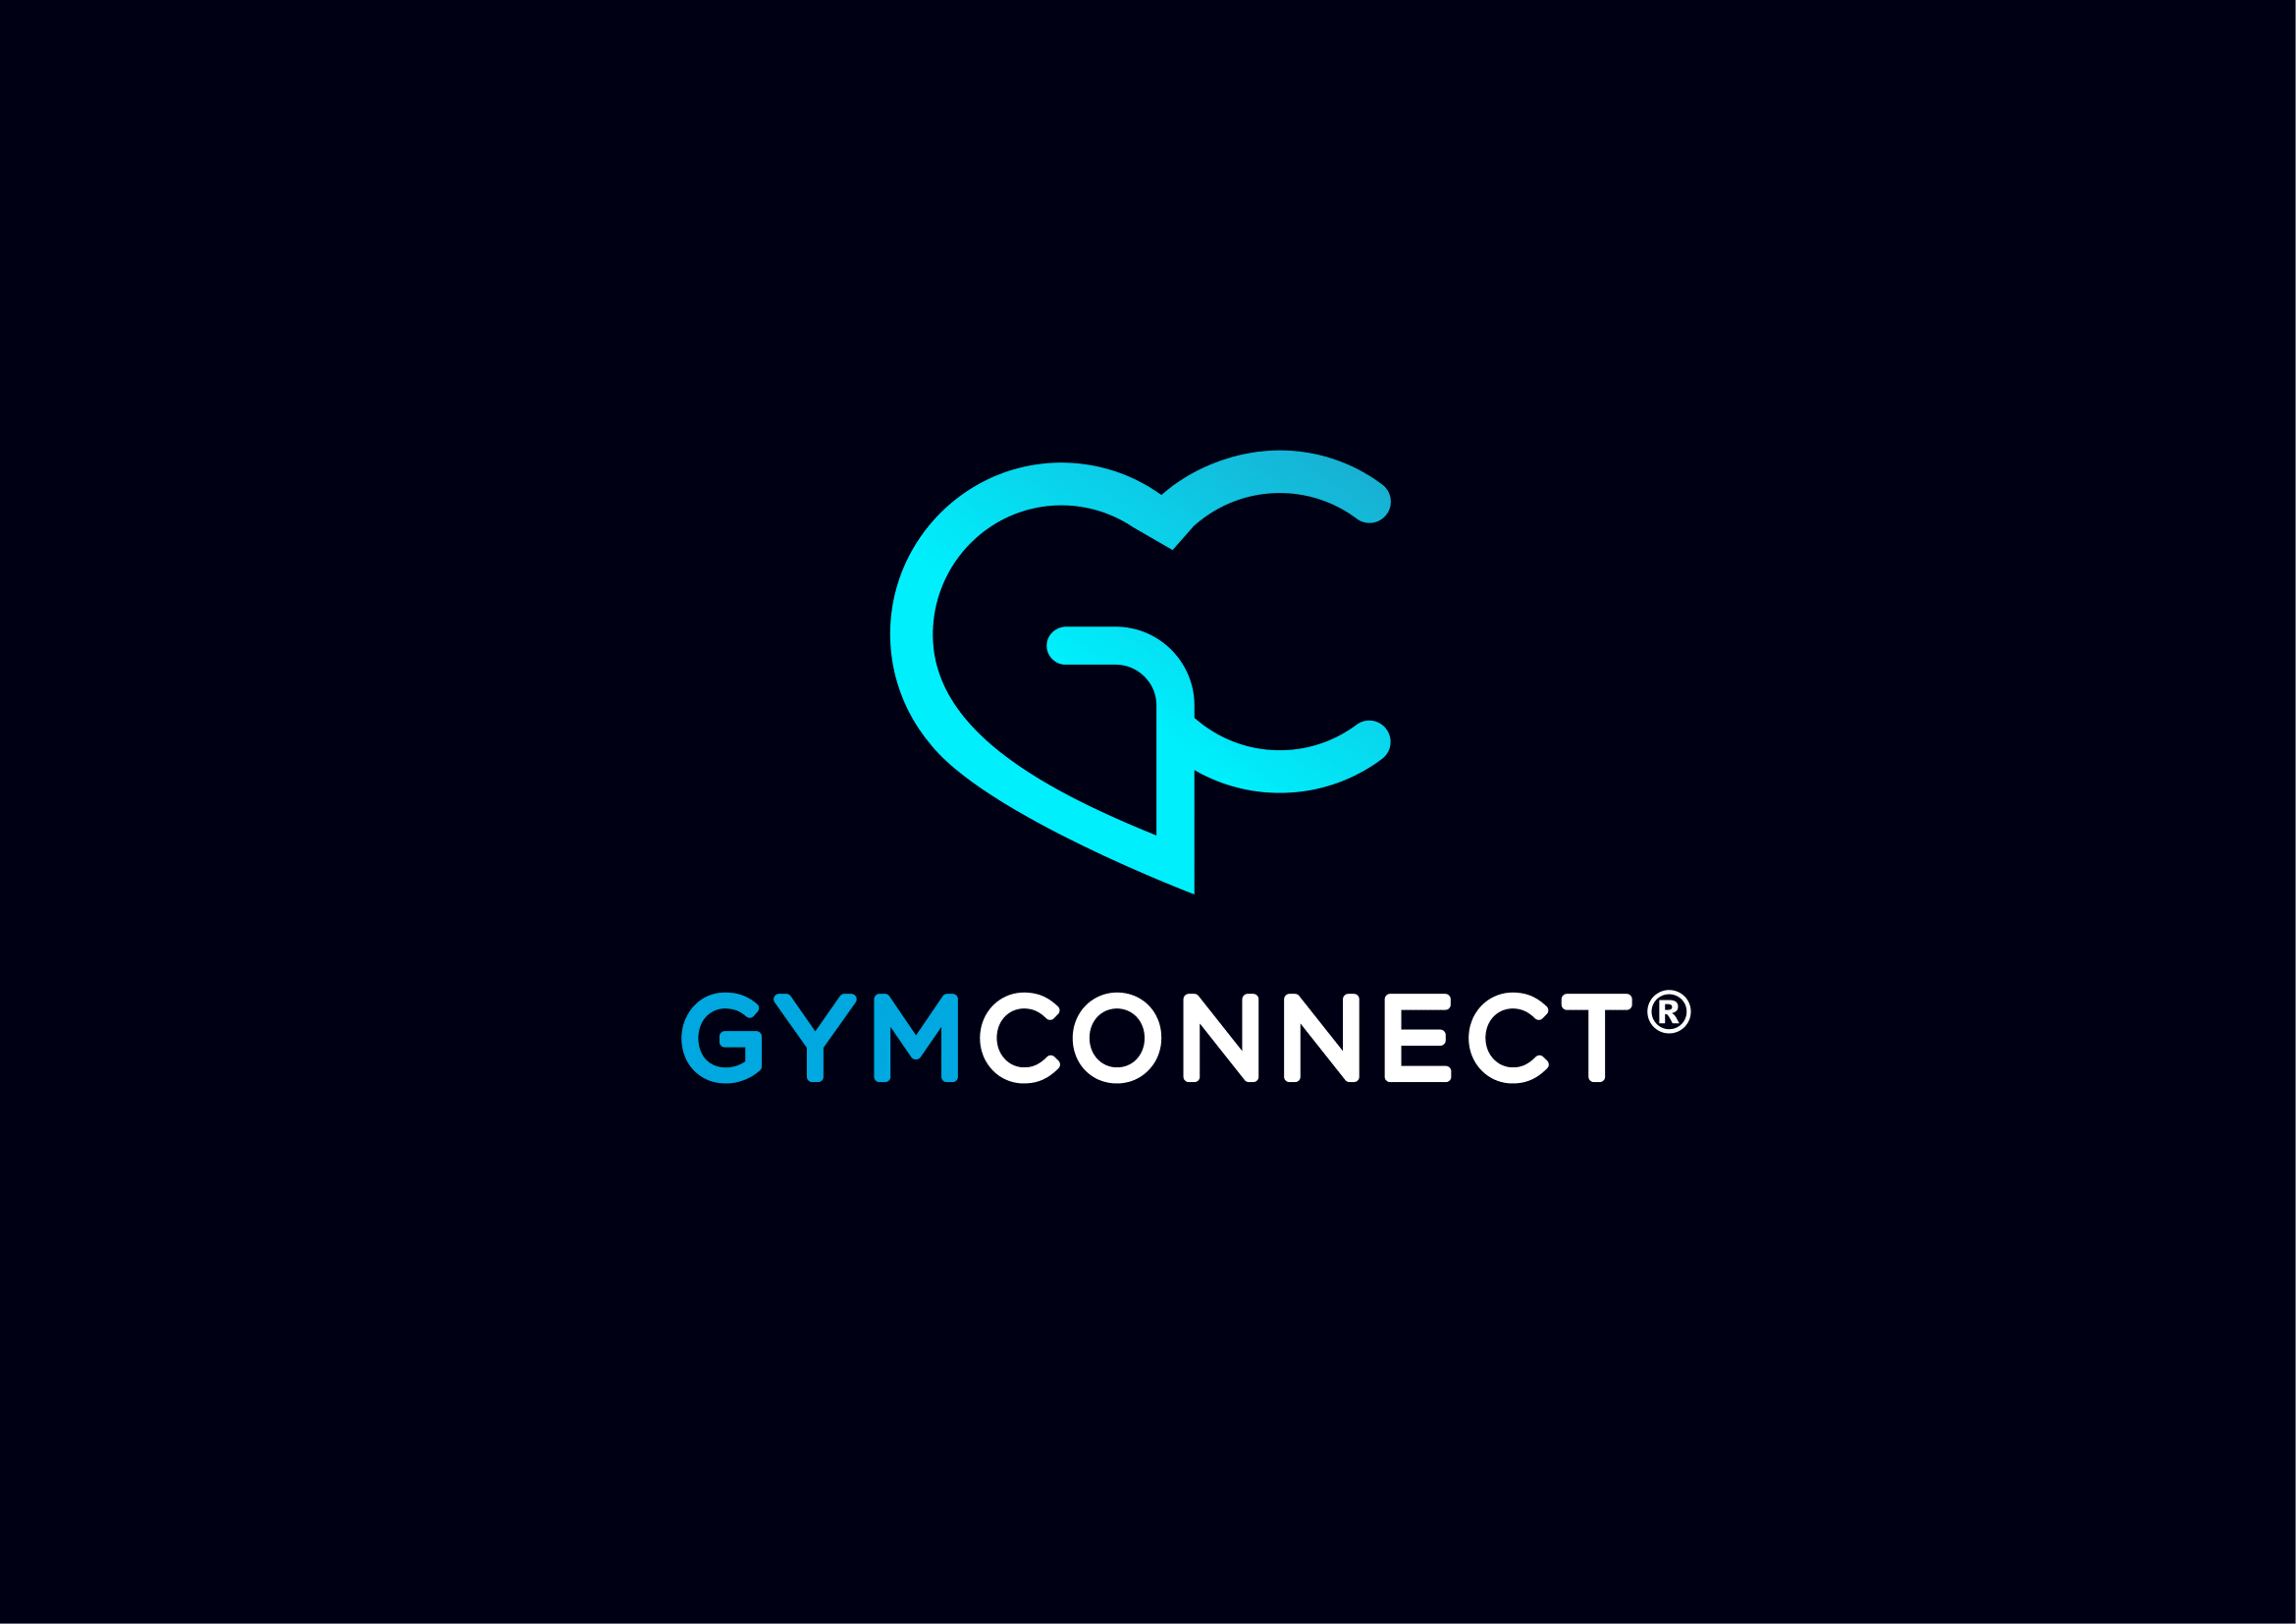 Gymconnect variations-1